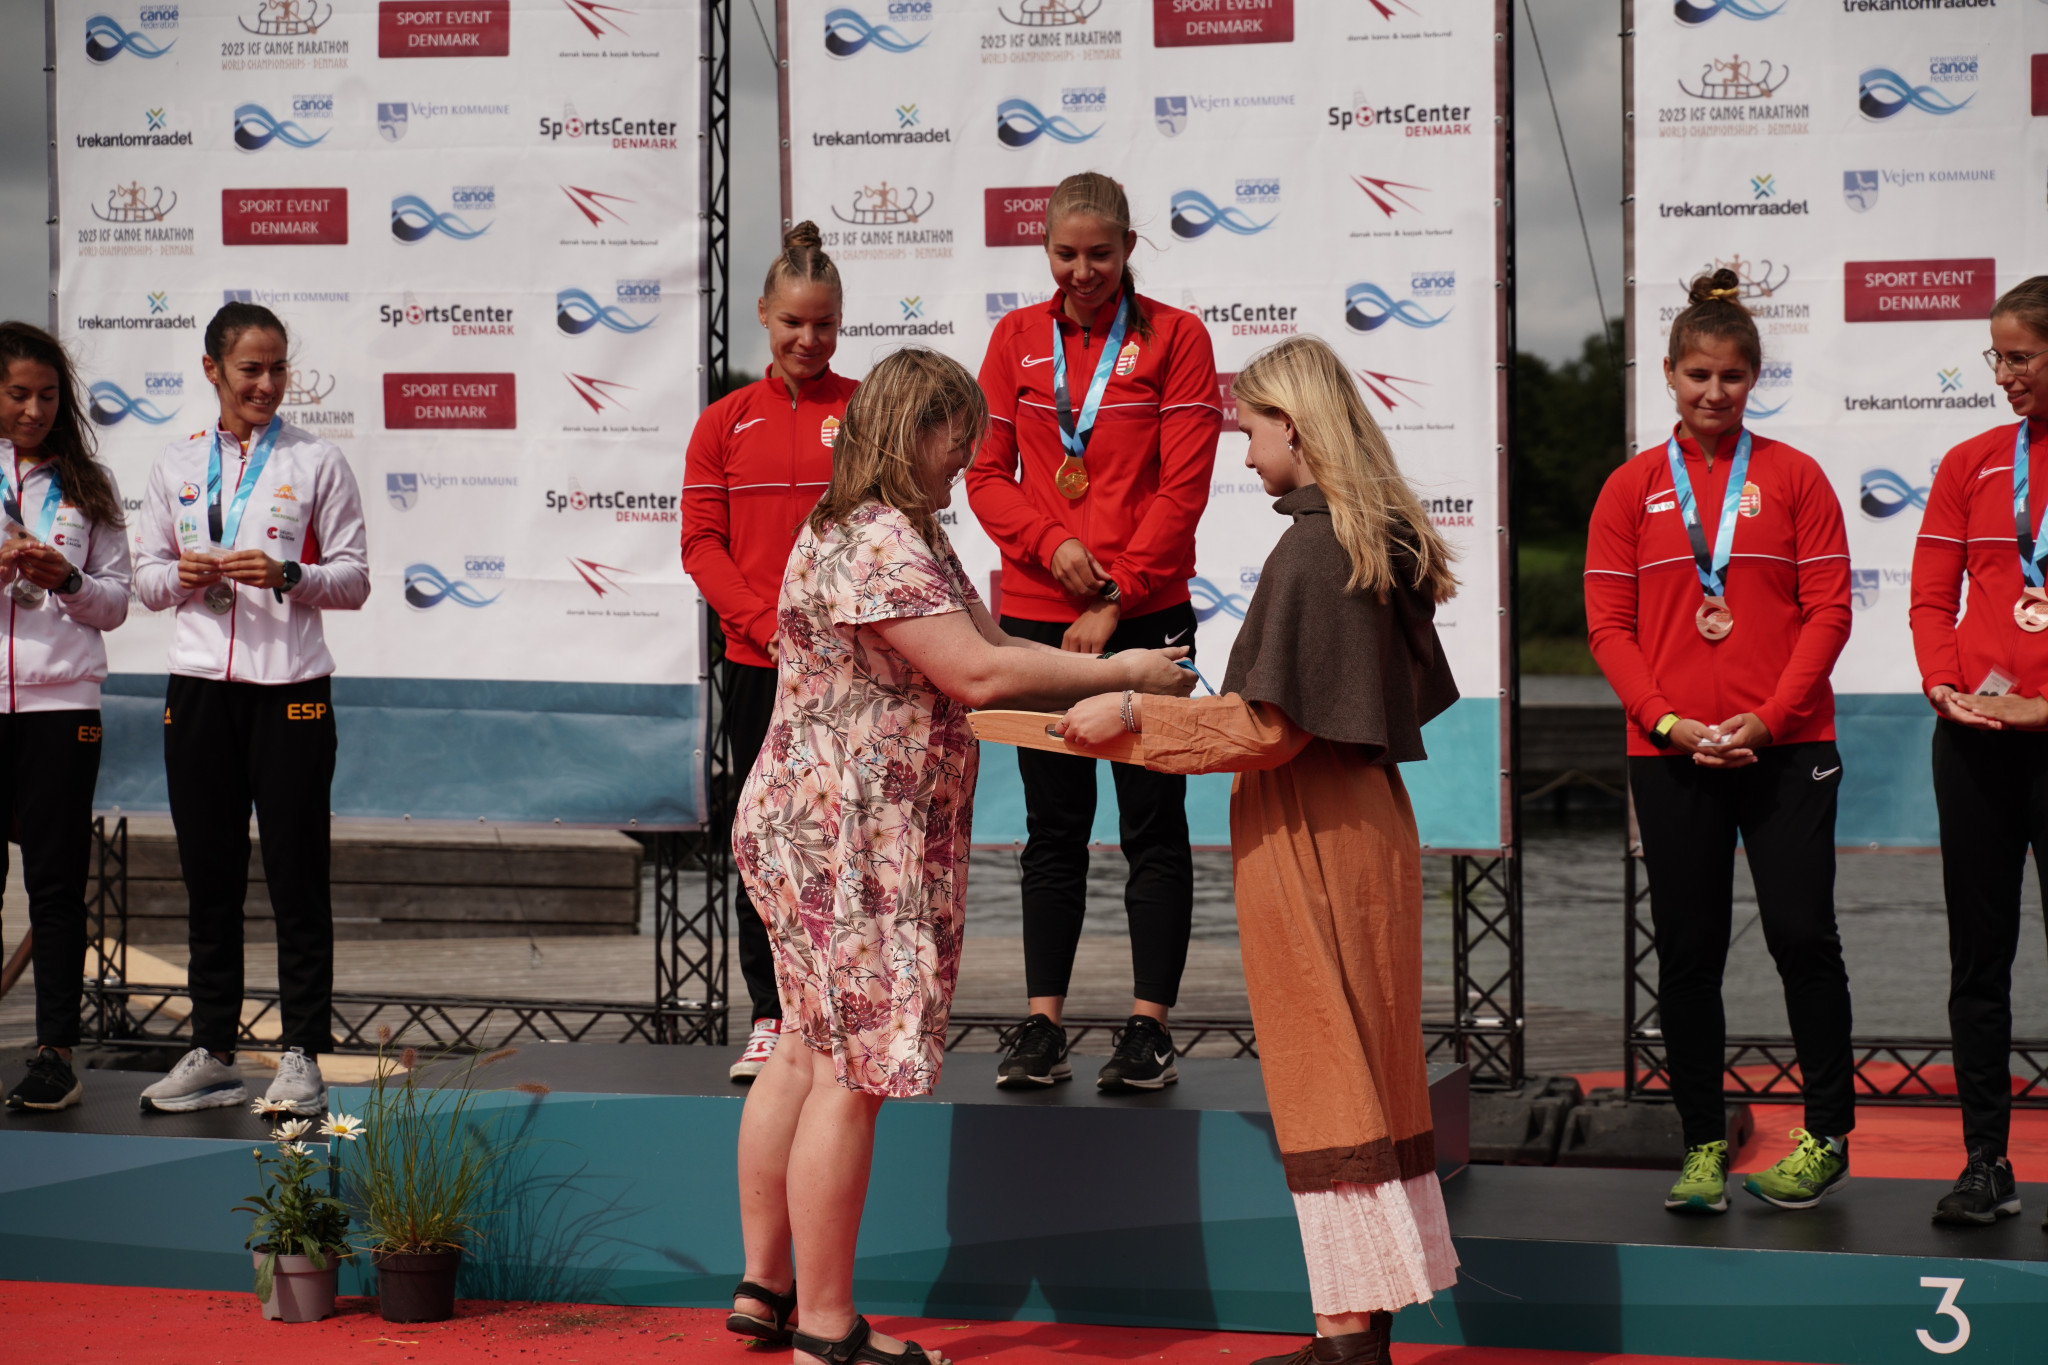 Hungary claimed gold and bronze in the women's K2 race as they topped the overall standings ©Svend-Erik Boysen/2023 ICF Canoe Marathon World Championships, Denmark